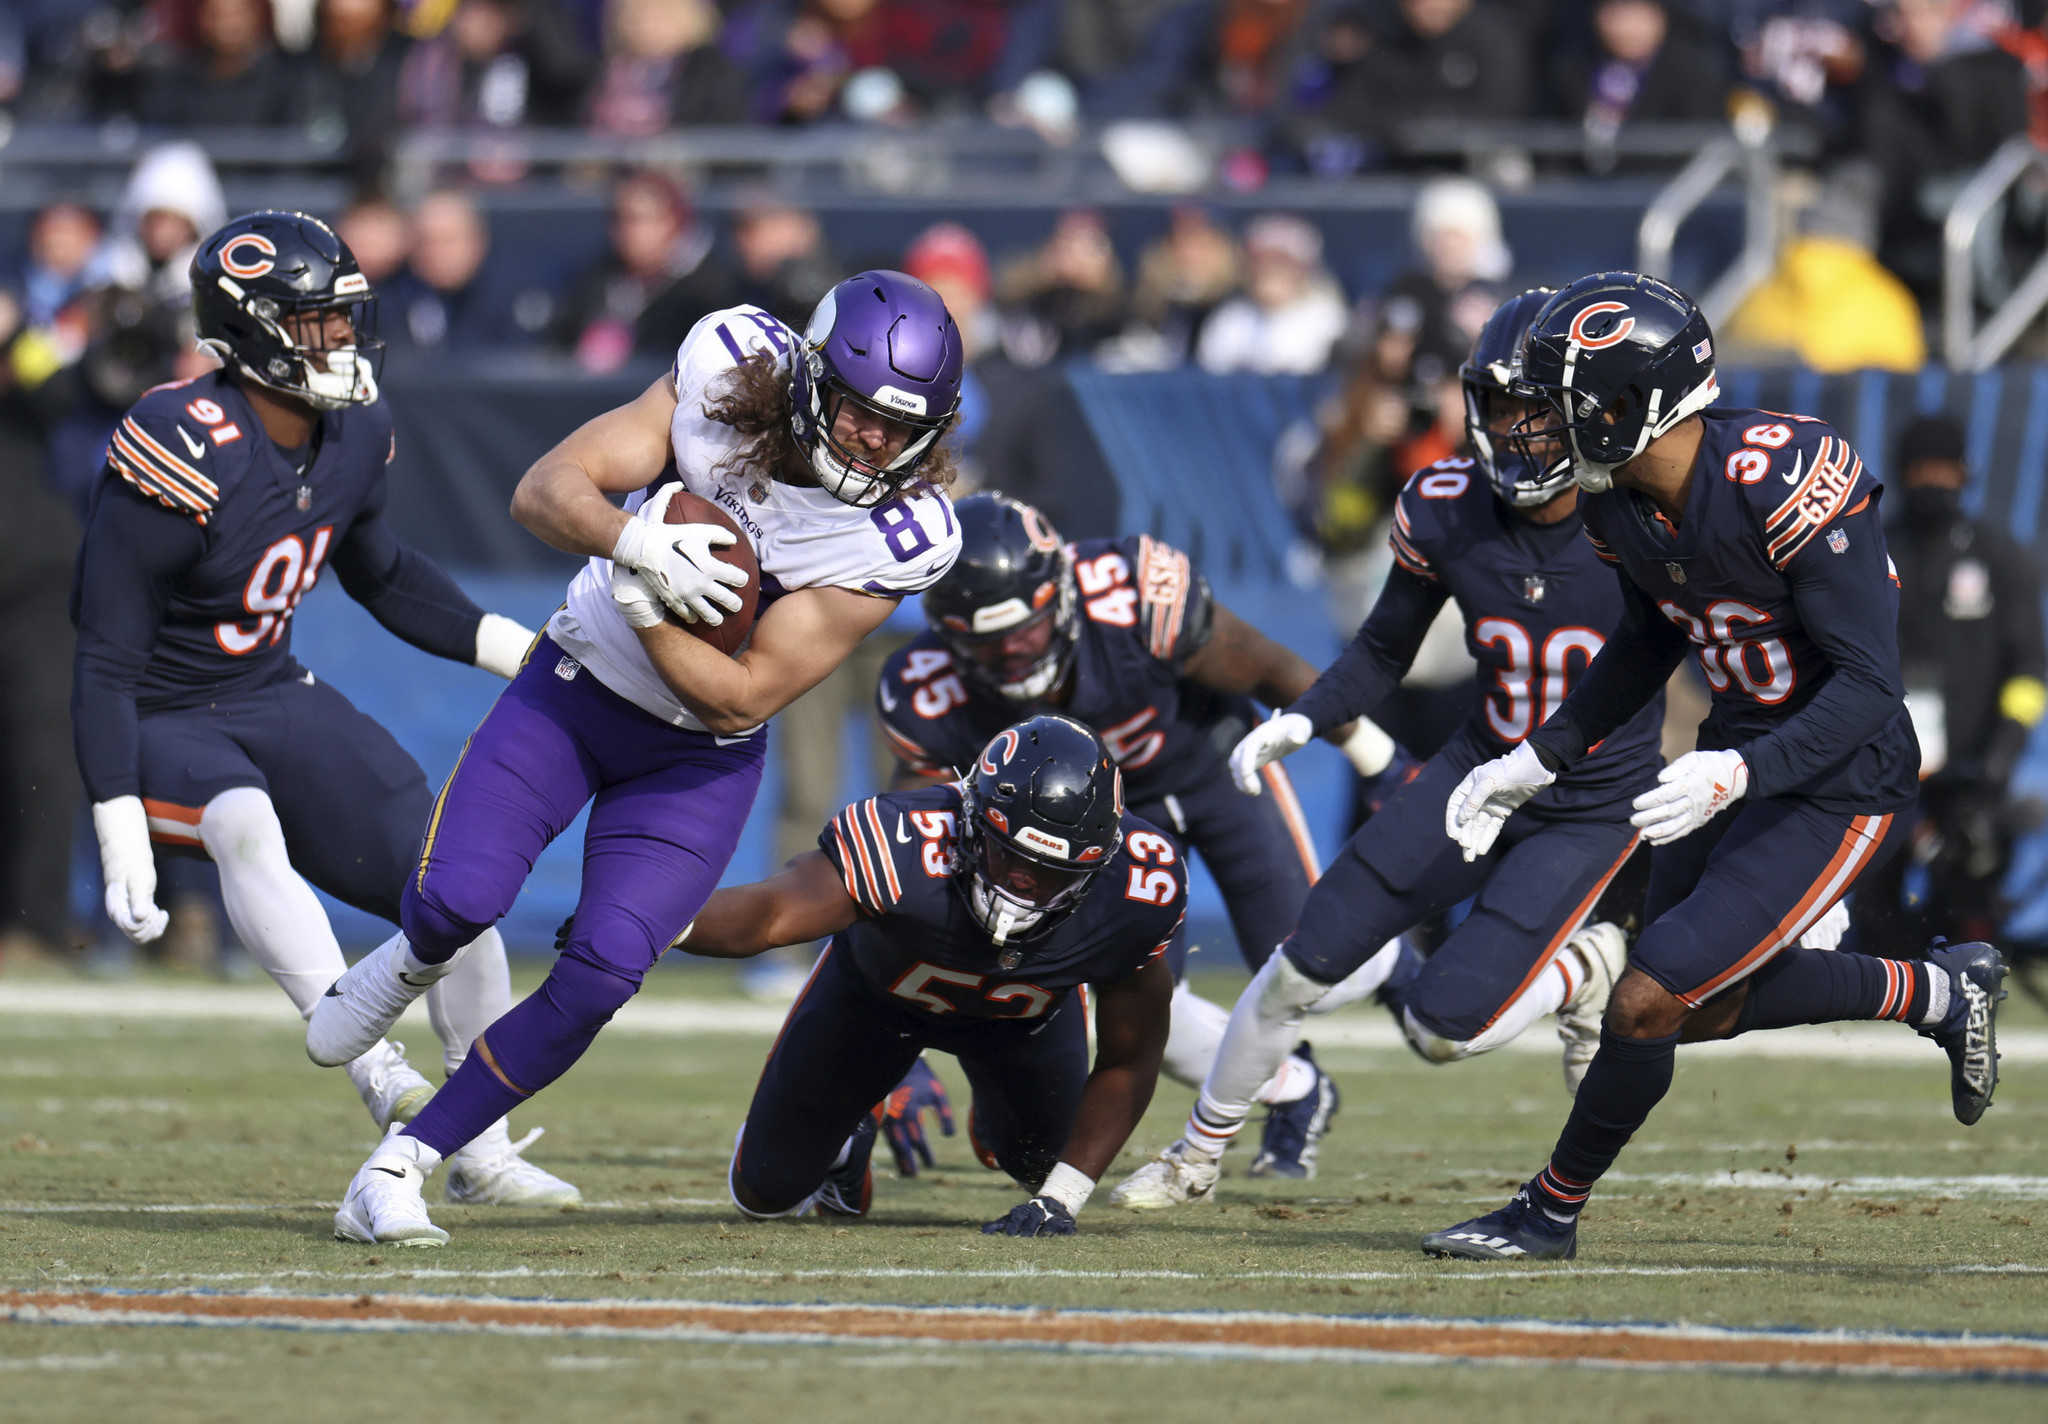 Tight end T.J. Hockenson (#8) of the Minnesota Vikings receives the ball in the game against the Chicago Bears at Soldier Field in Chicago, Illinois, January 8, 2023. /CFP